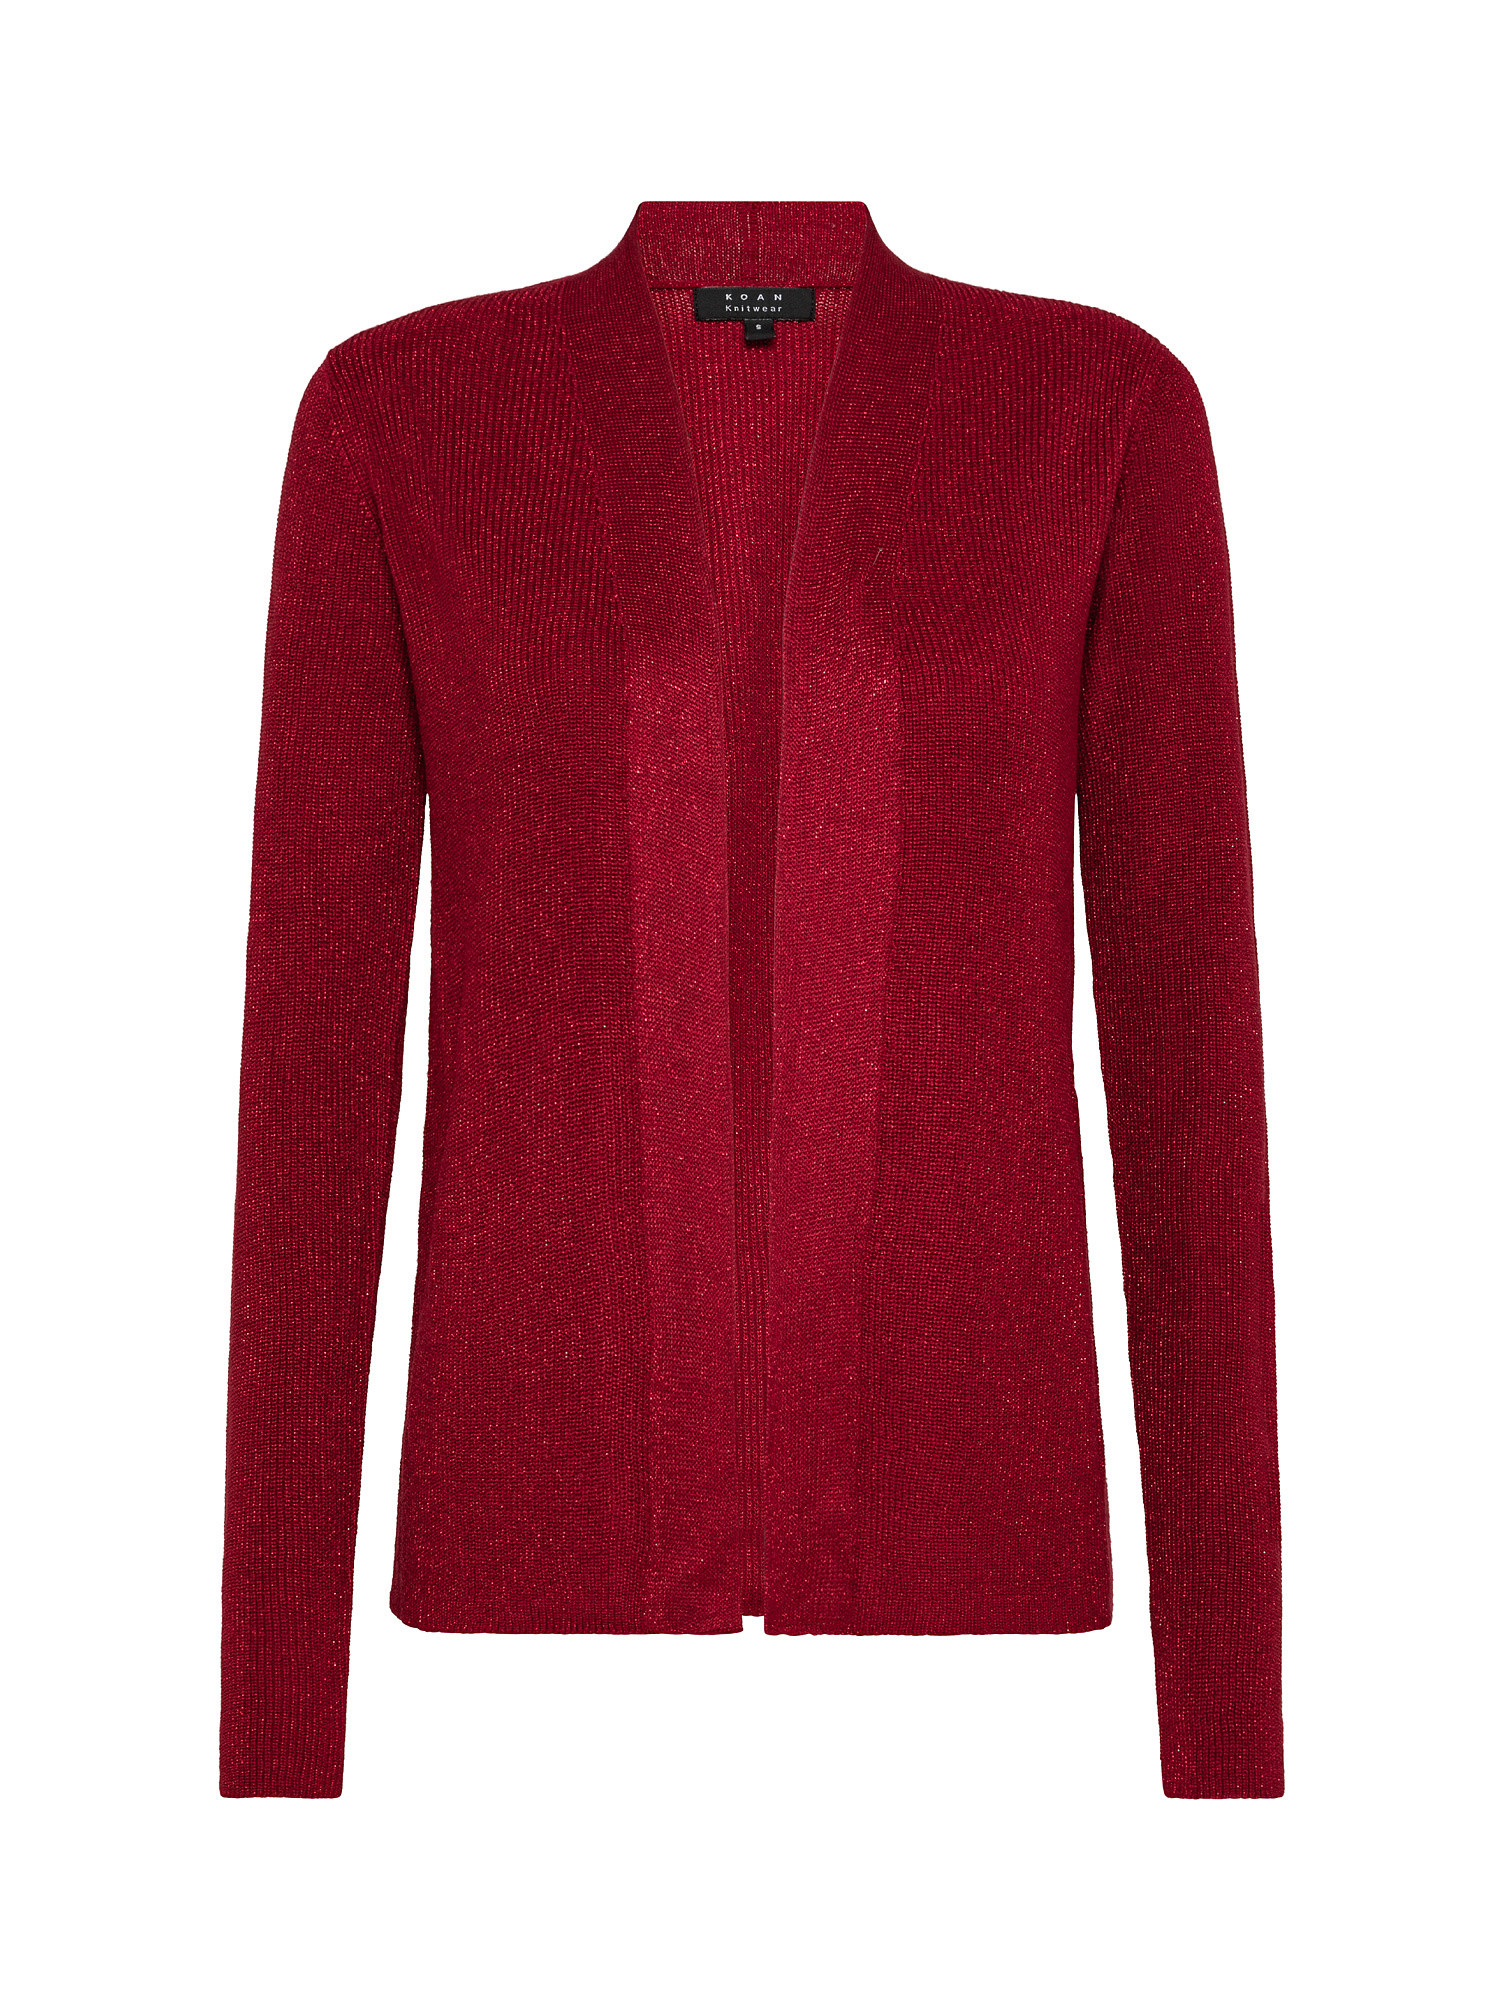 Knitted cardigan, Red, large image number 0